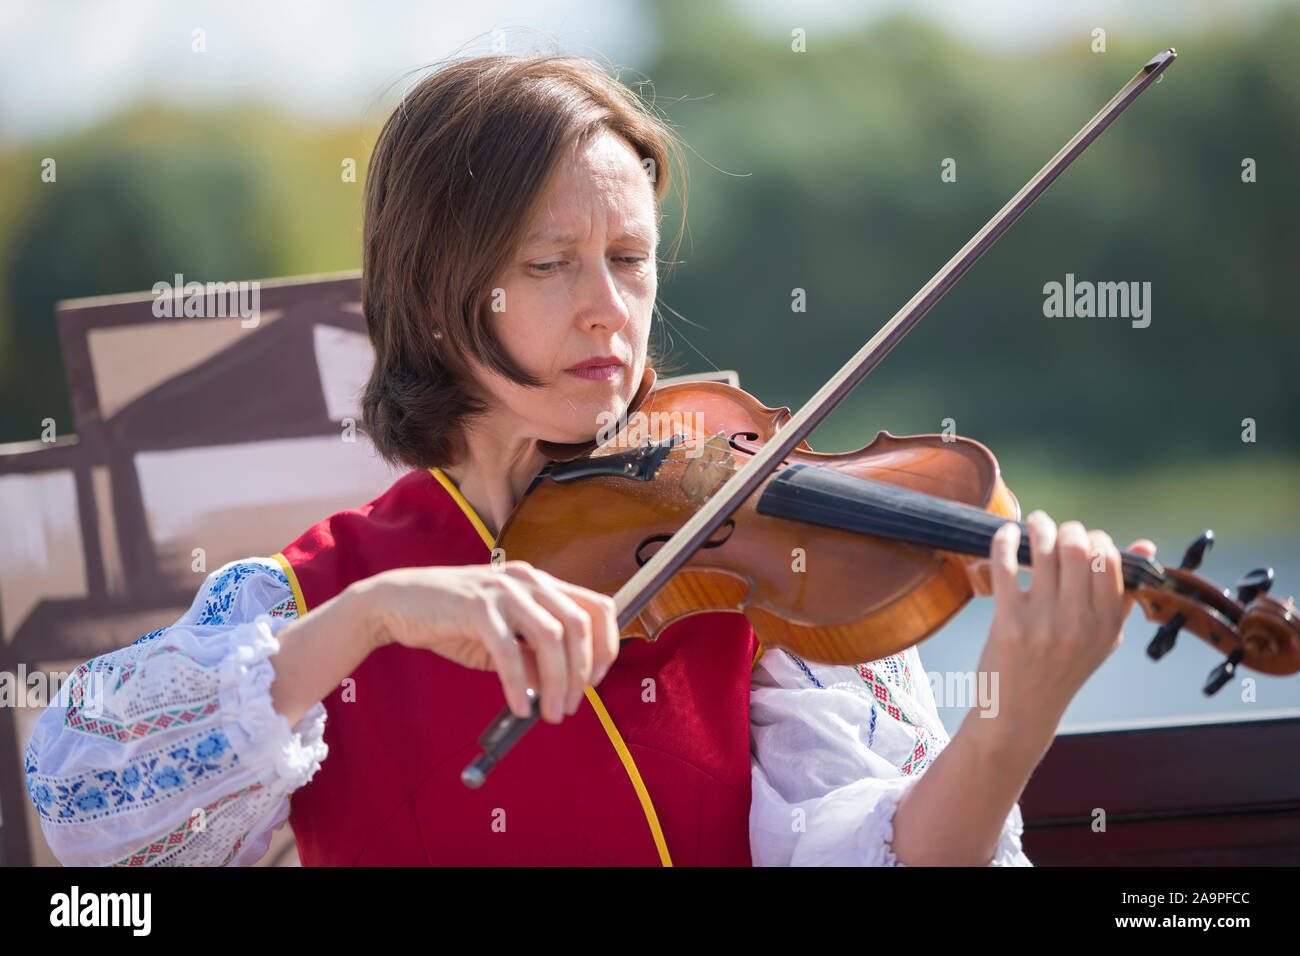 Belarus, the city of Gomil, September 14, 2019. City holiday. Slavic woman street musician. Ukrainian or Belarusian girl in an embroidered shirt plays Stock Photo